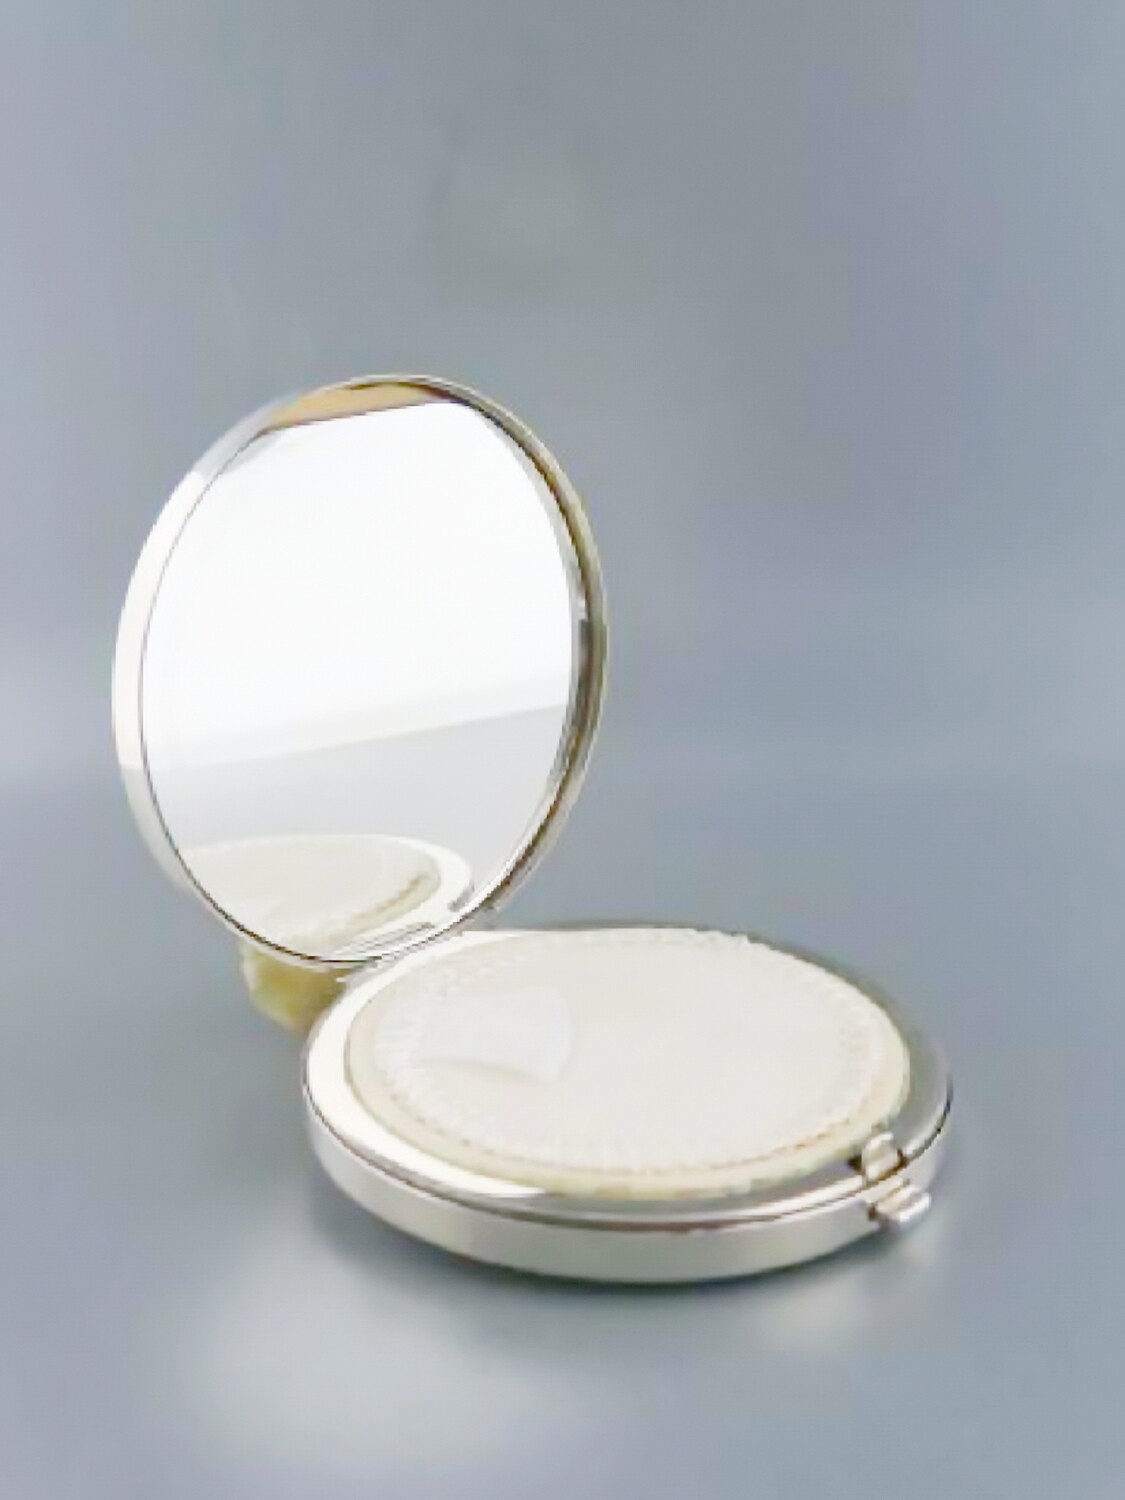 Vintage Tiffany Solid Silver Mirrored Compact Powder Mirror with Box